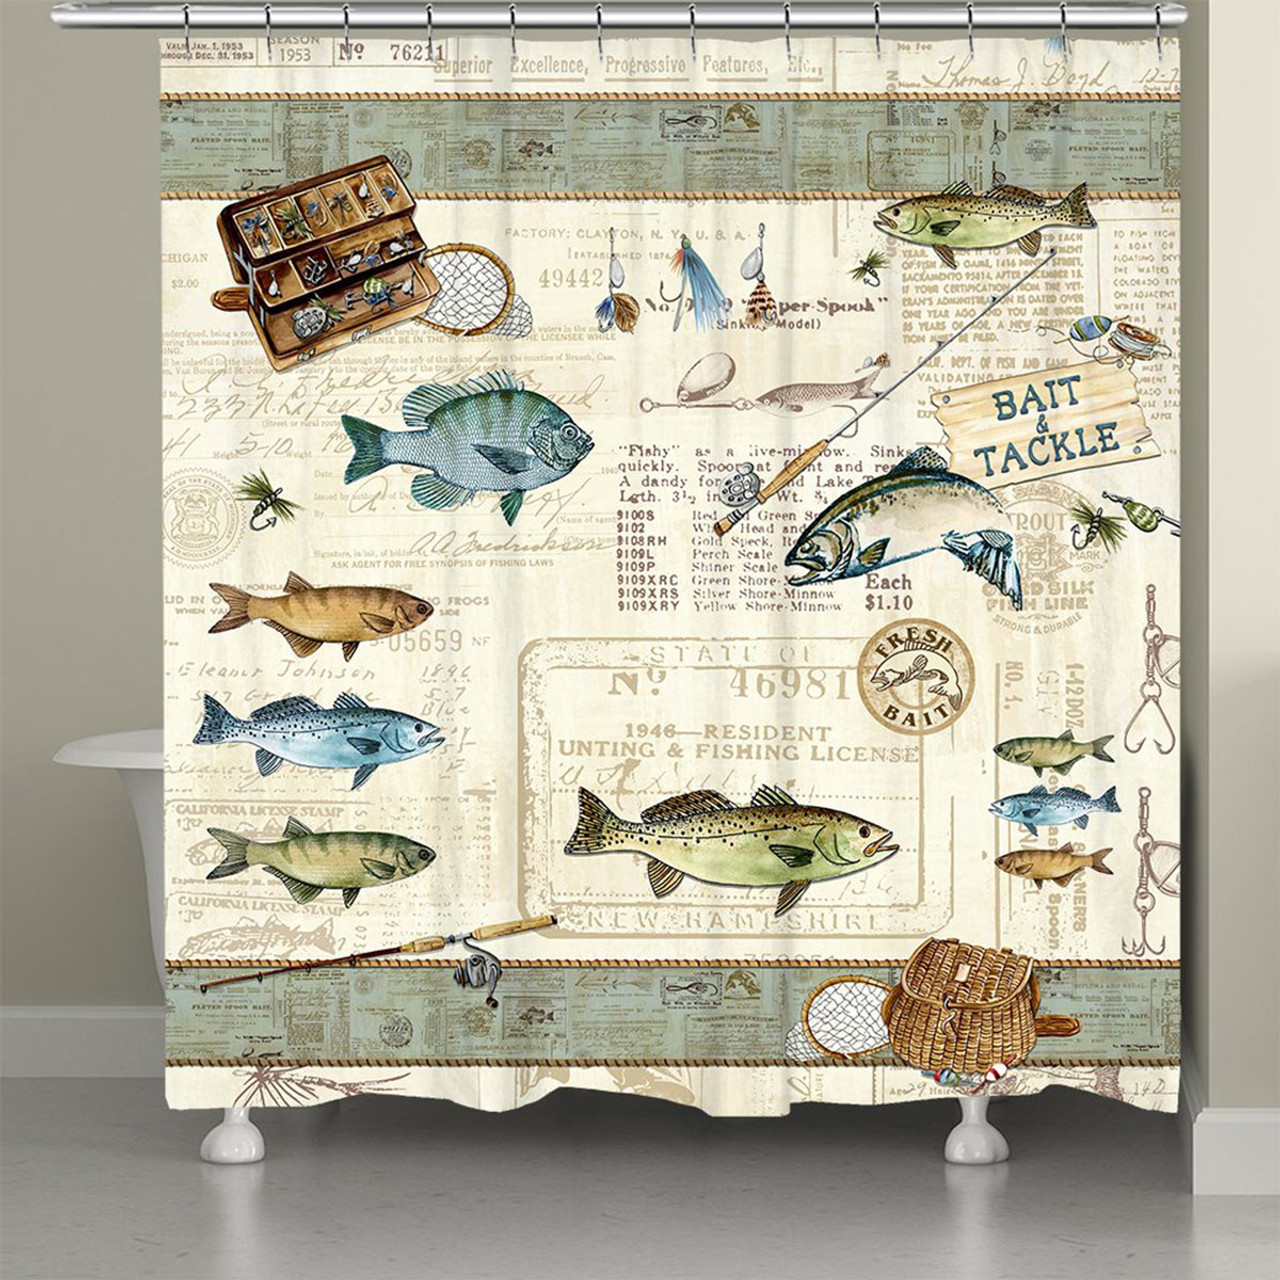 Rustic Shower Curtains: Fishing Lures Shower Curtain